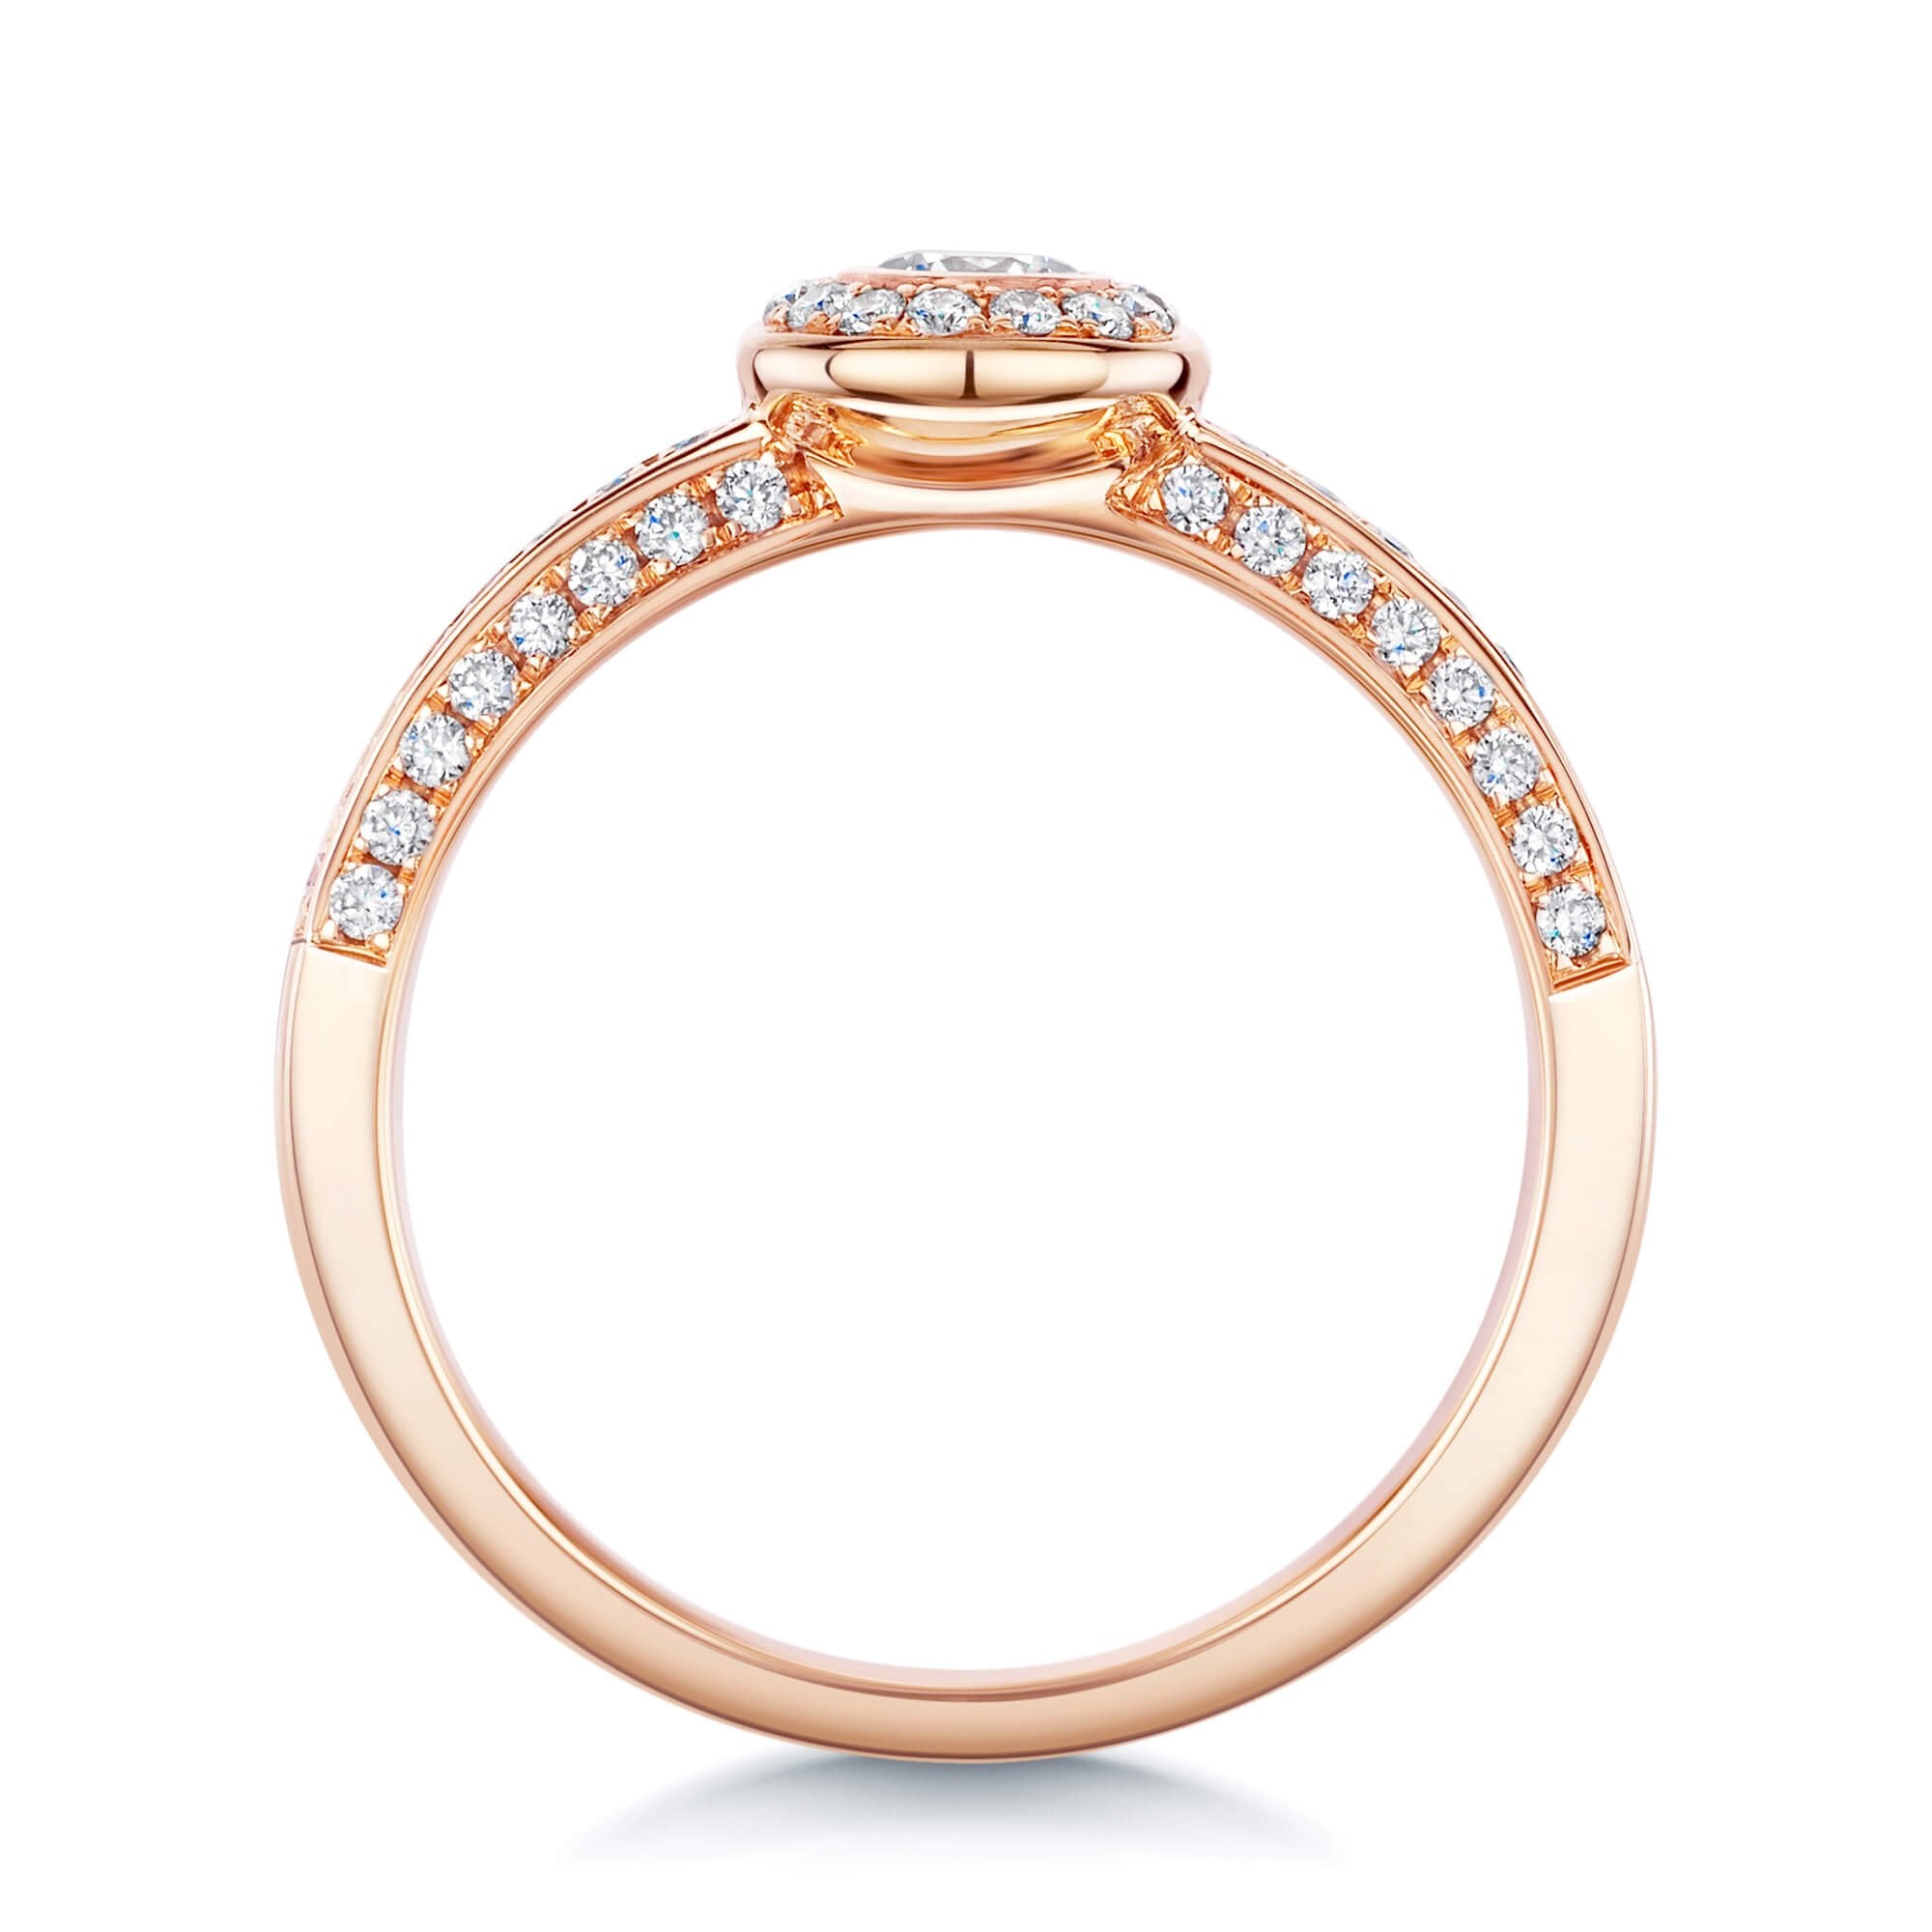 18ct Rose Gold Round Brilliant Cut Halo Diamond Ring With Diamond Set Shoulders